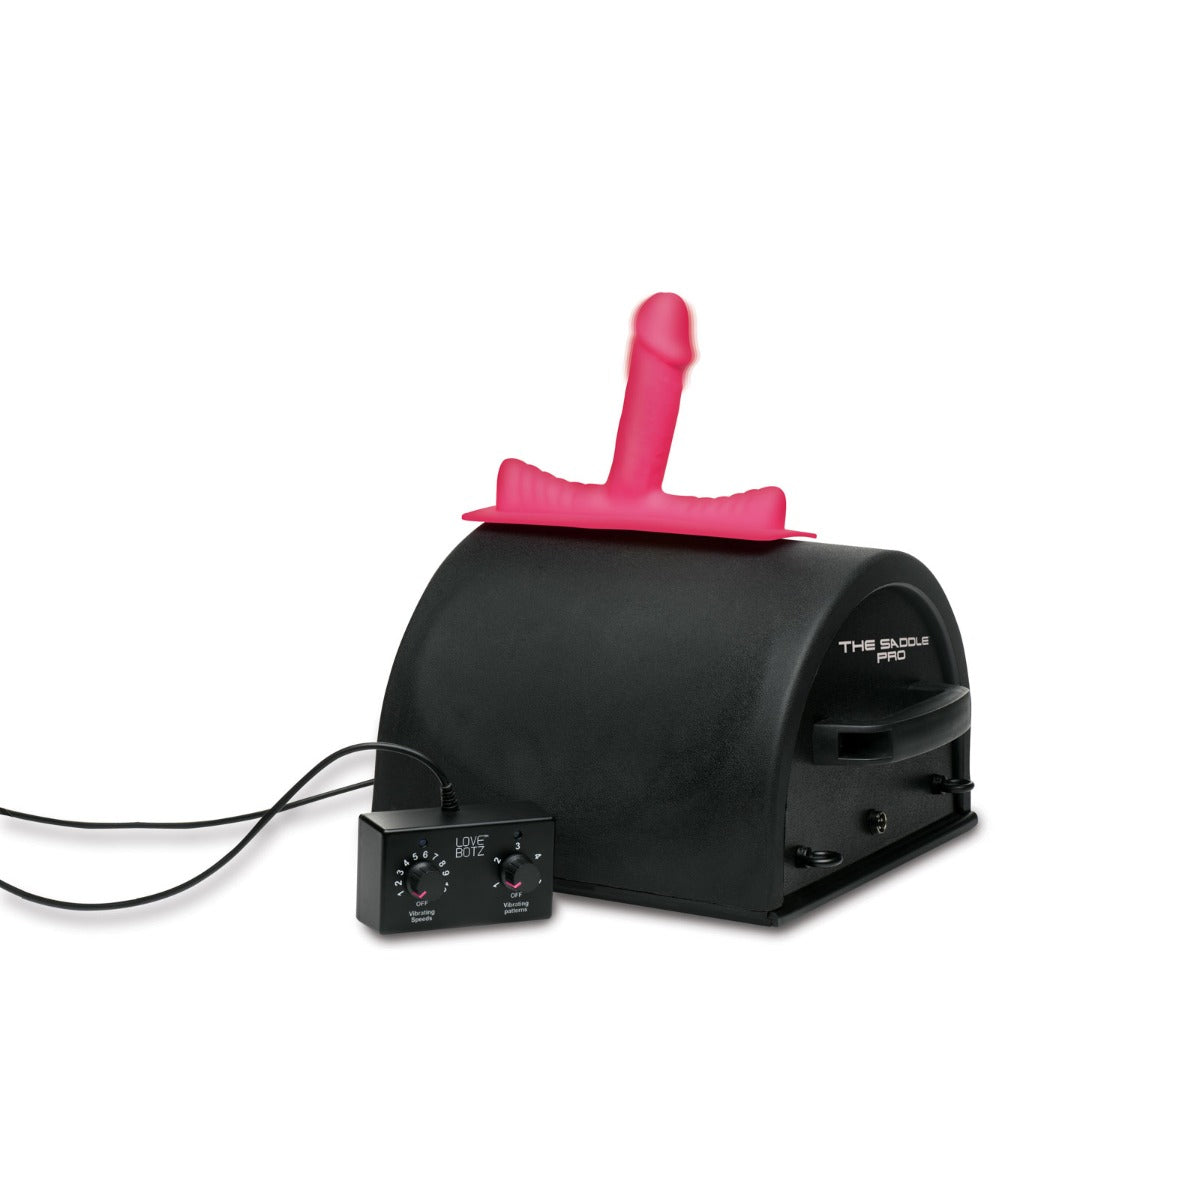 Lovebotz | 50x Saddle Pro Ultimate Sex Machine With 4 Silicone Attachments